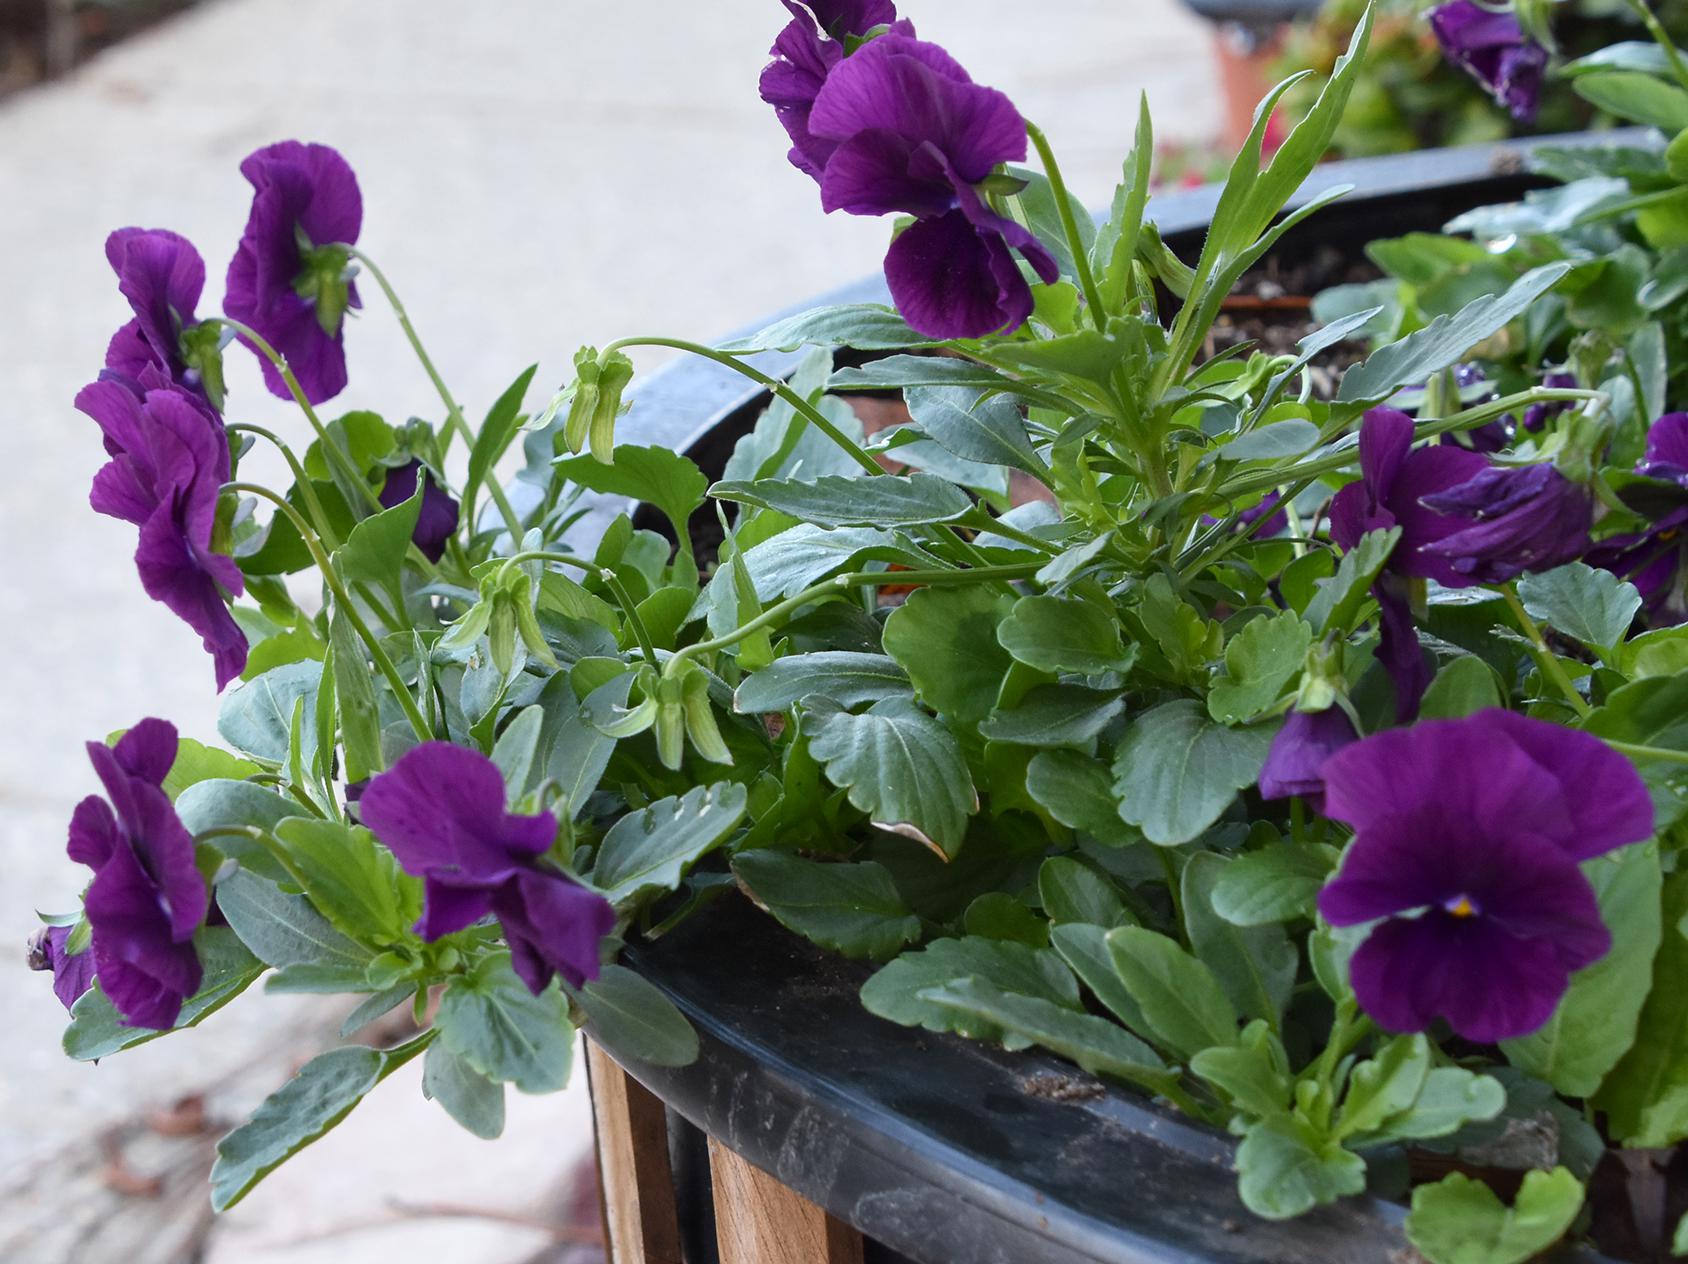 Cool Wave pansies are more vigorous than standard pansy varieties and have a trailing growth habit that makes them ideal for filling landscape beds or spilling from hanging baskets. (Photo by MSU Extension/Gary Bachman)